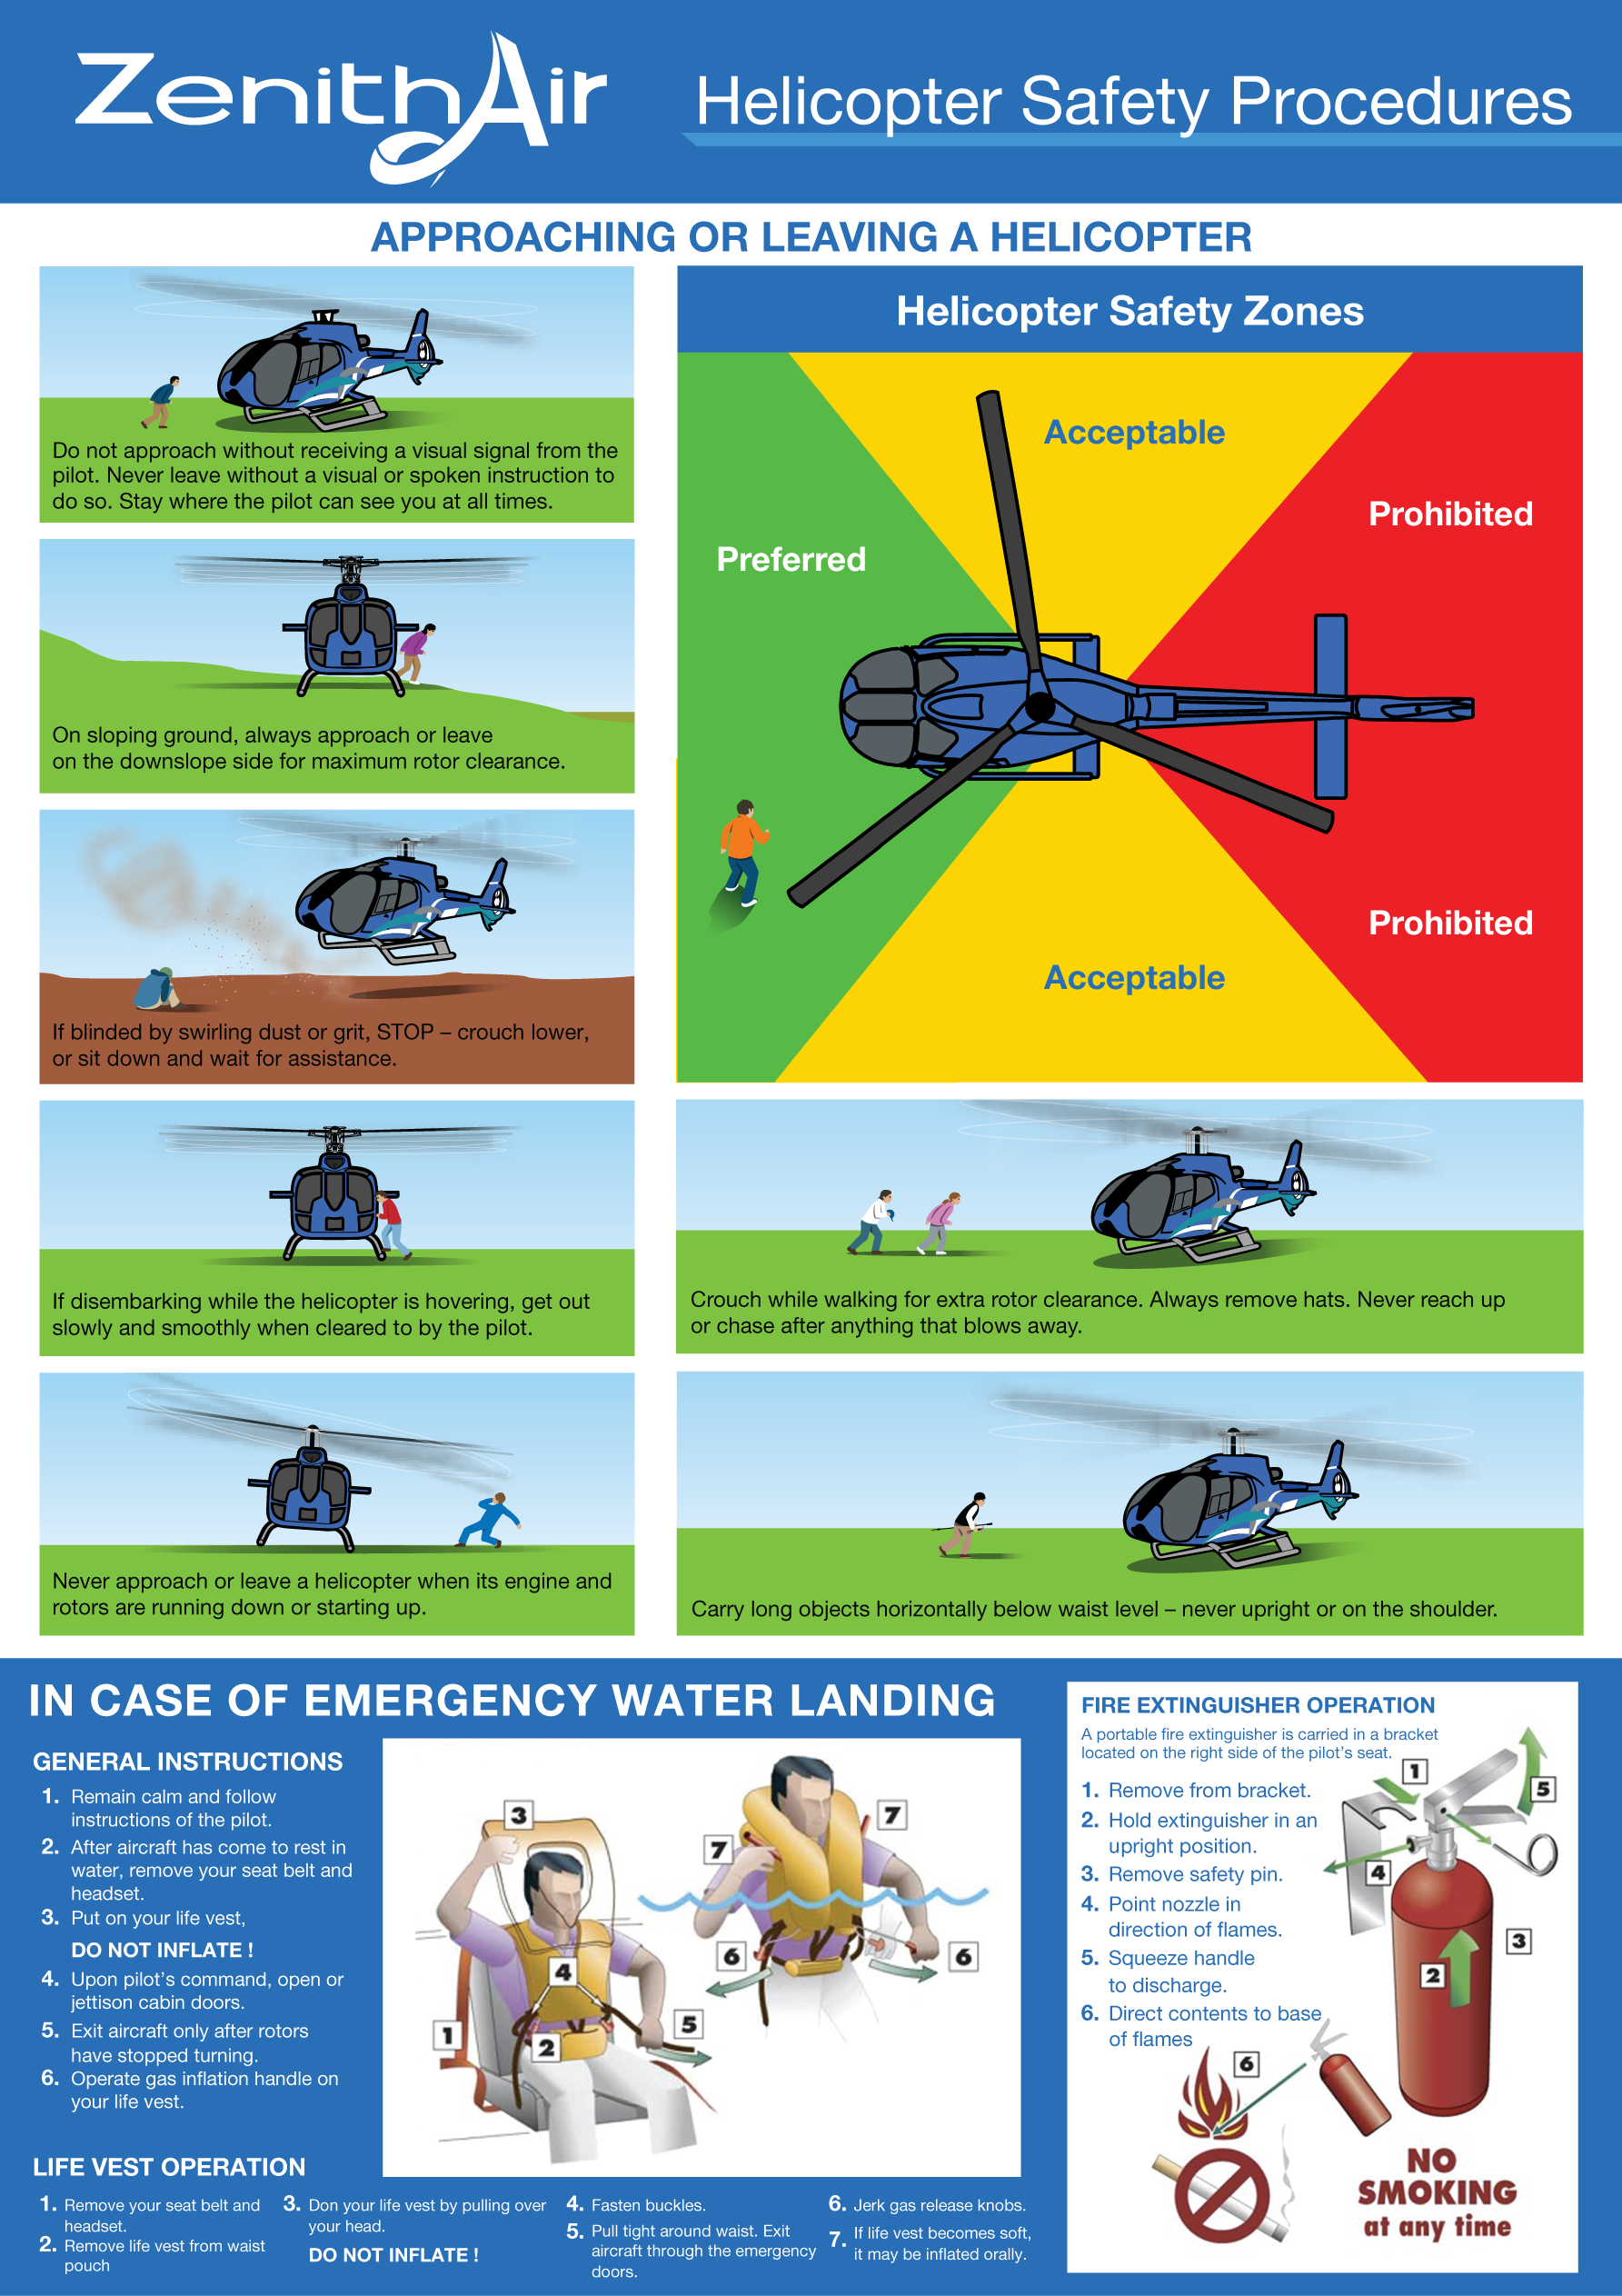 Safety procedures with helicopters